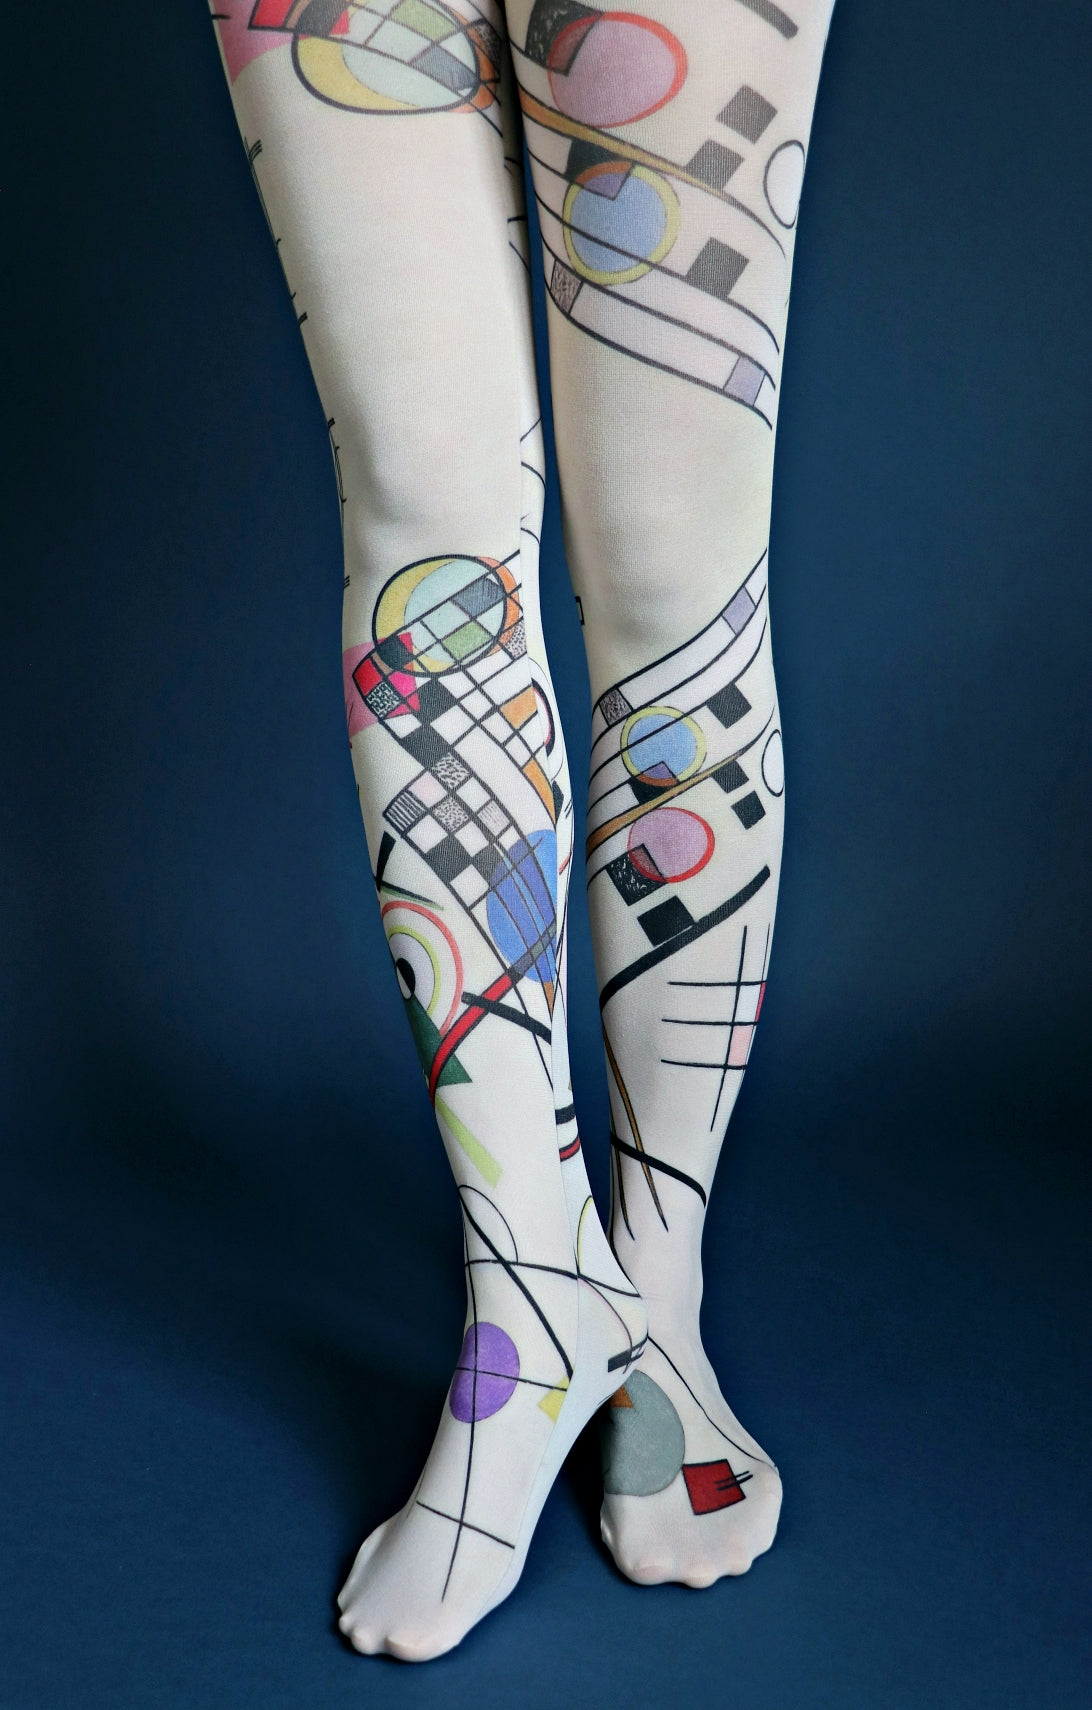 Composition from the Wassily Kandinsky Collection of the TABBISOCKS brand, with black and pink geometric patterns, musical notes and sheet music, and the overall color is a dull light green